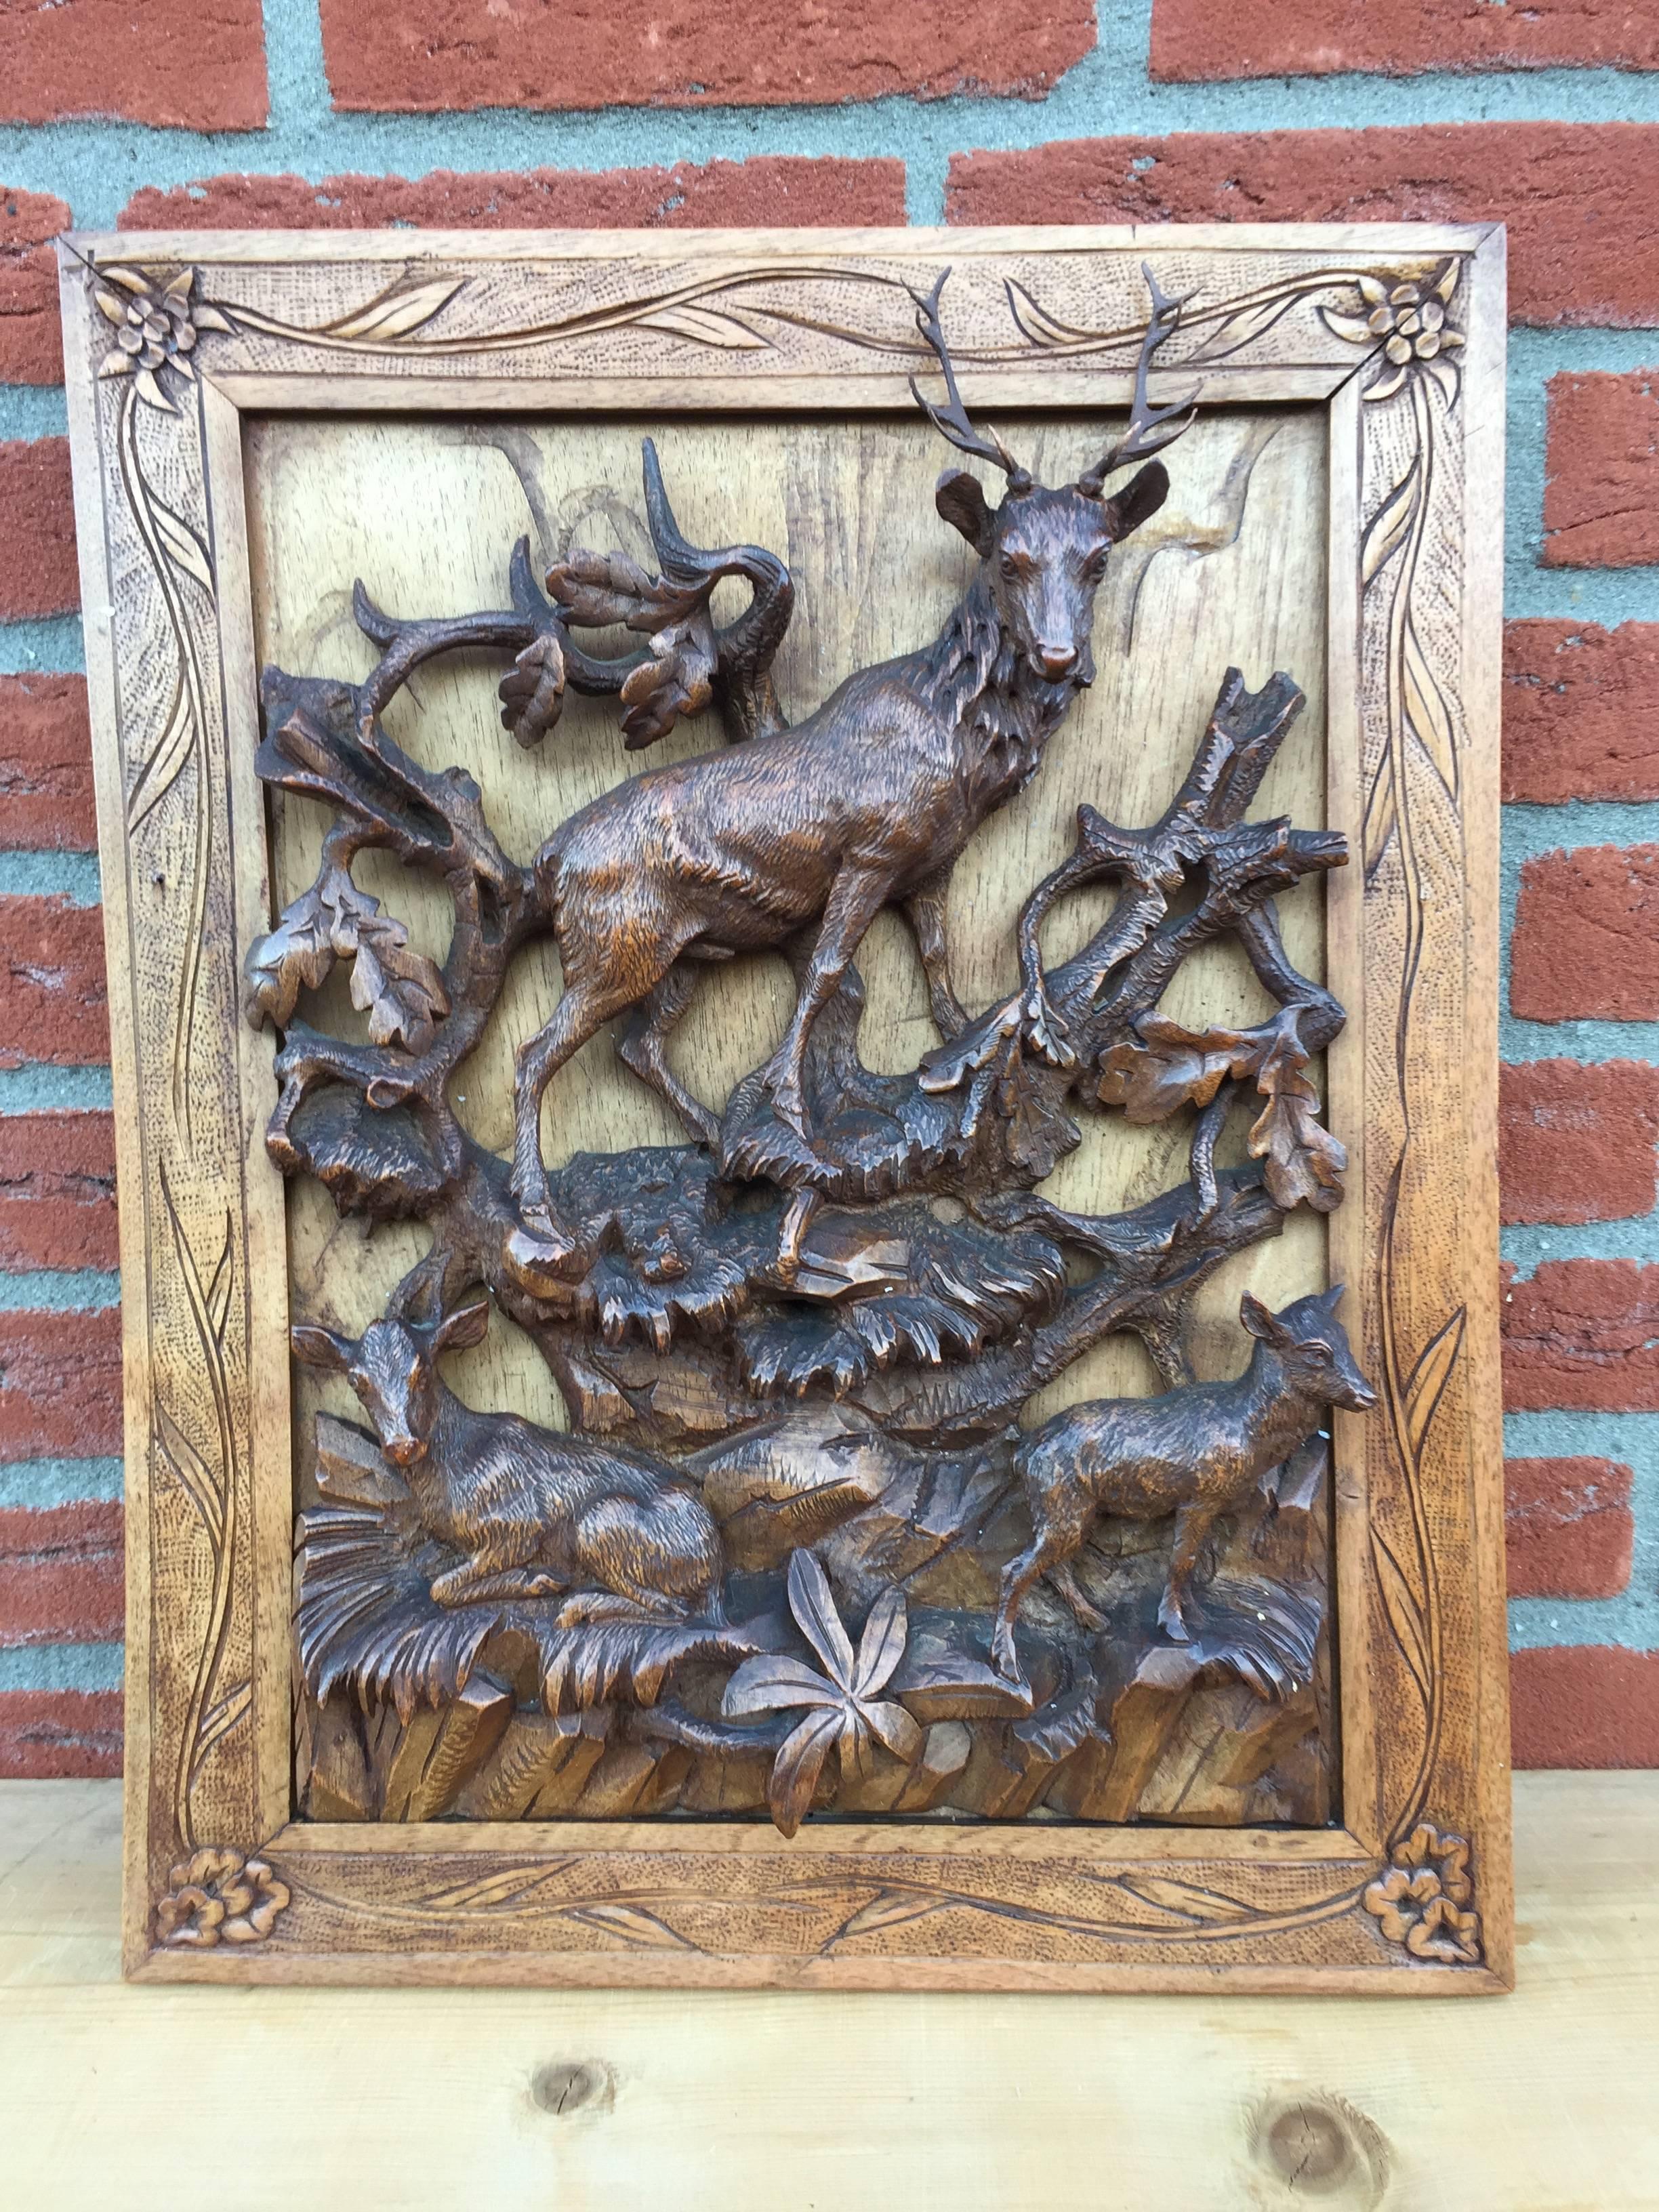 Rare pair of Swiss hand carved walnut-wood 3D wall plaques.

These quality carved wall plaques in deep relief date from circa 1870. This pair will look great in every collector's home, study or office. This quality of years gone buy will make you